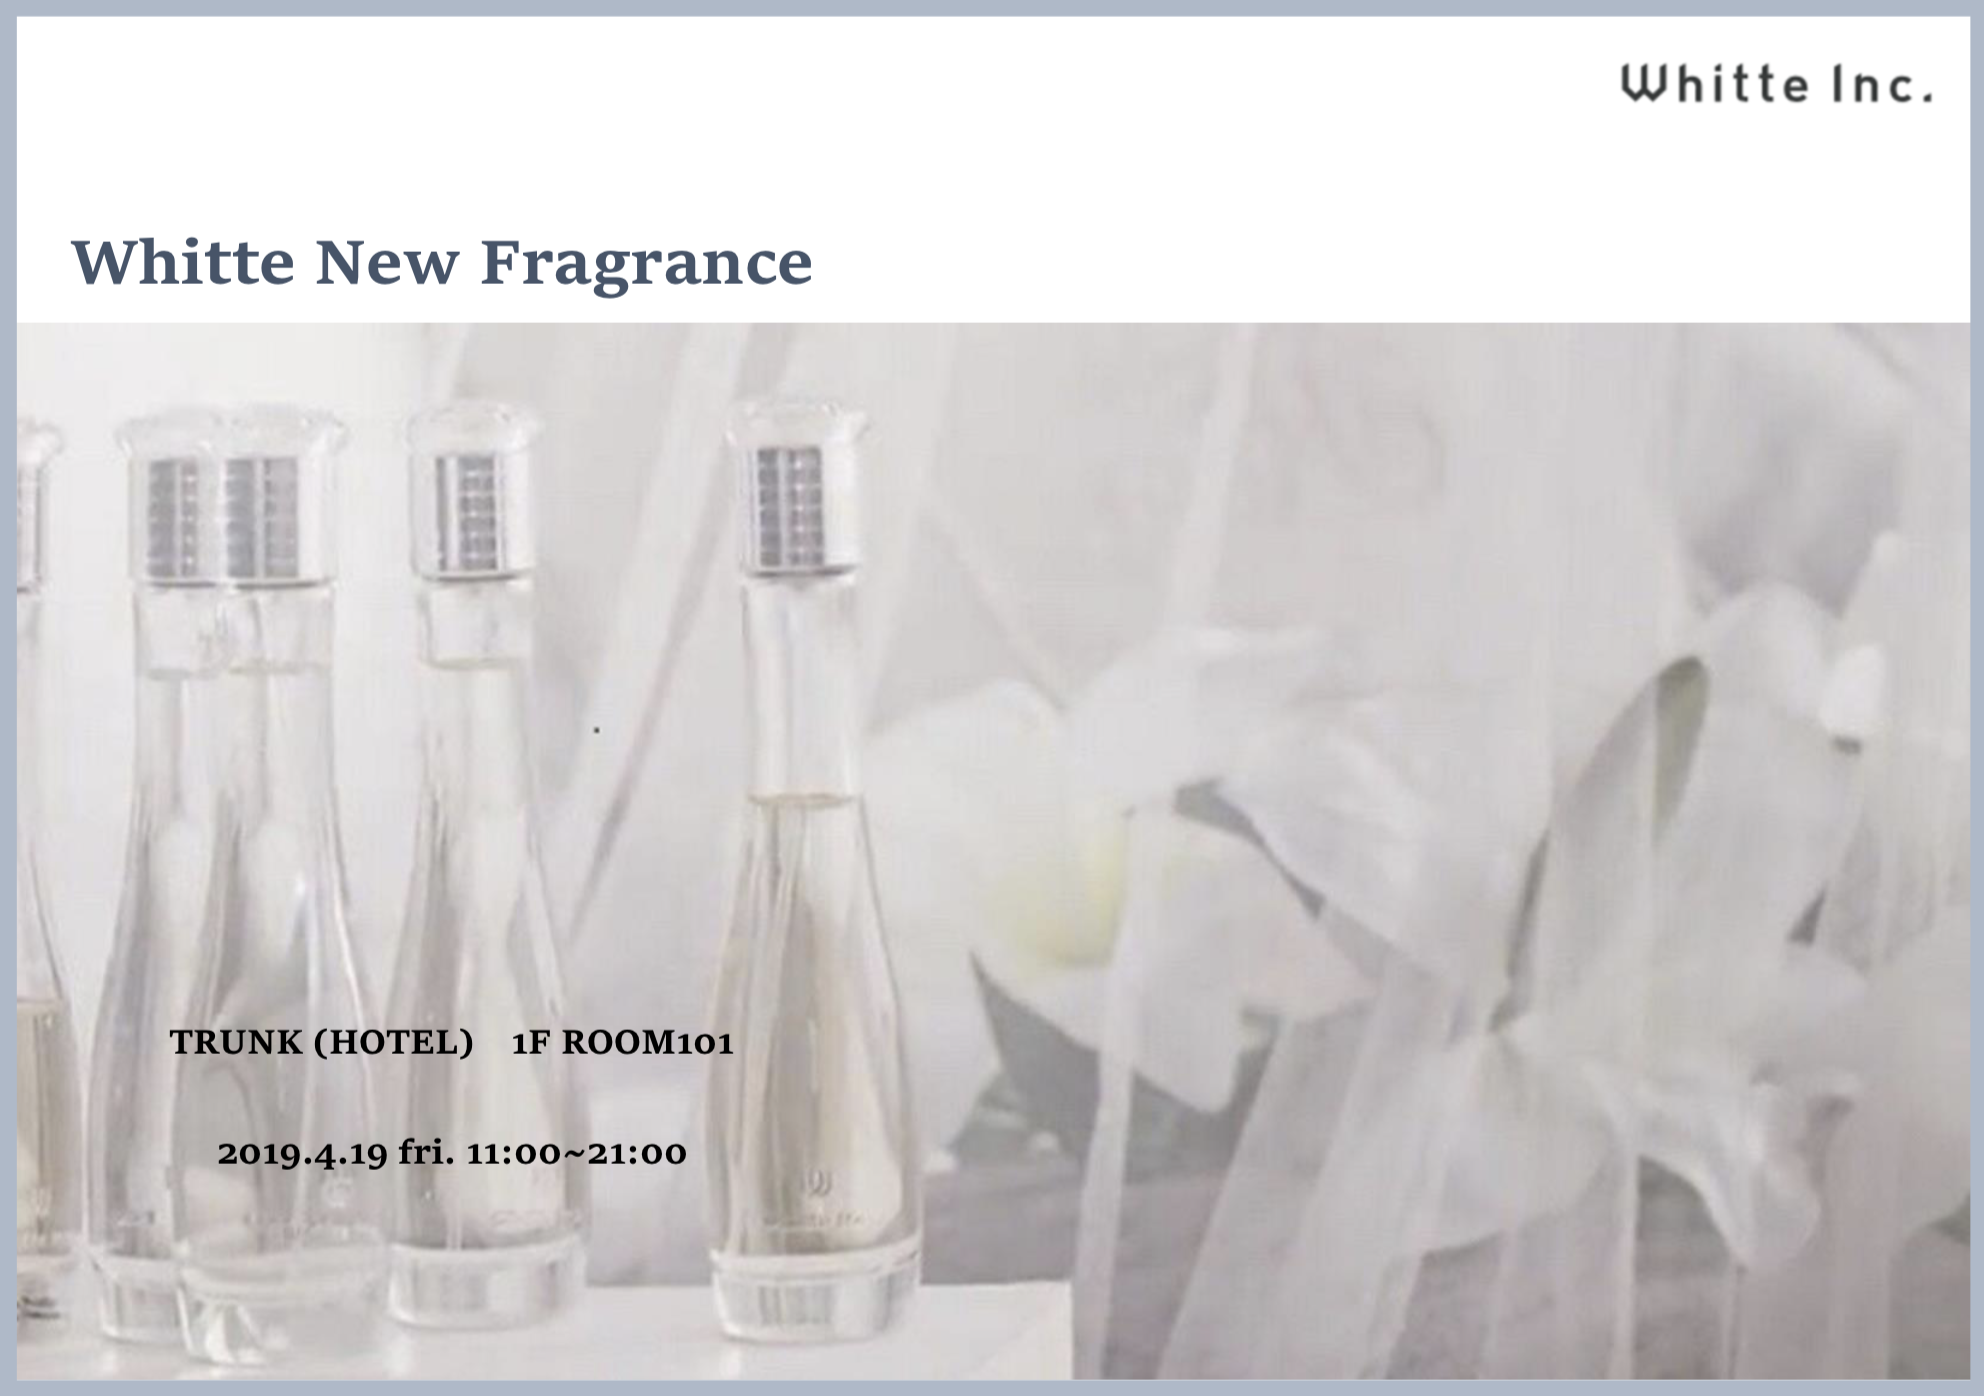 Whitte New Fragrance POP UP STORE